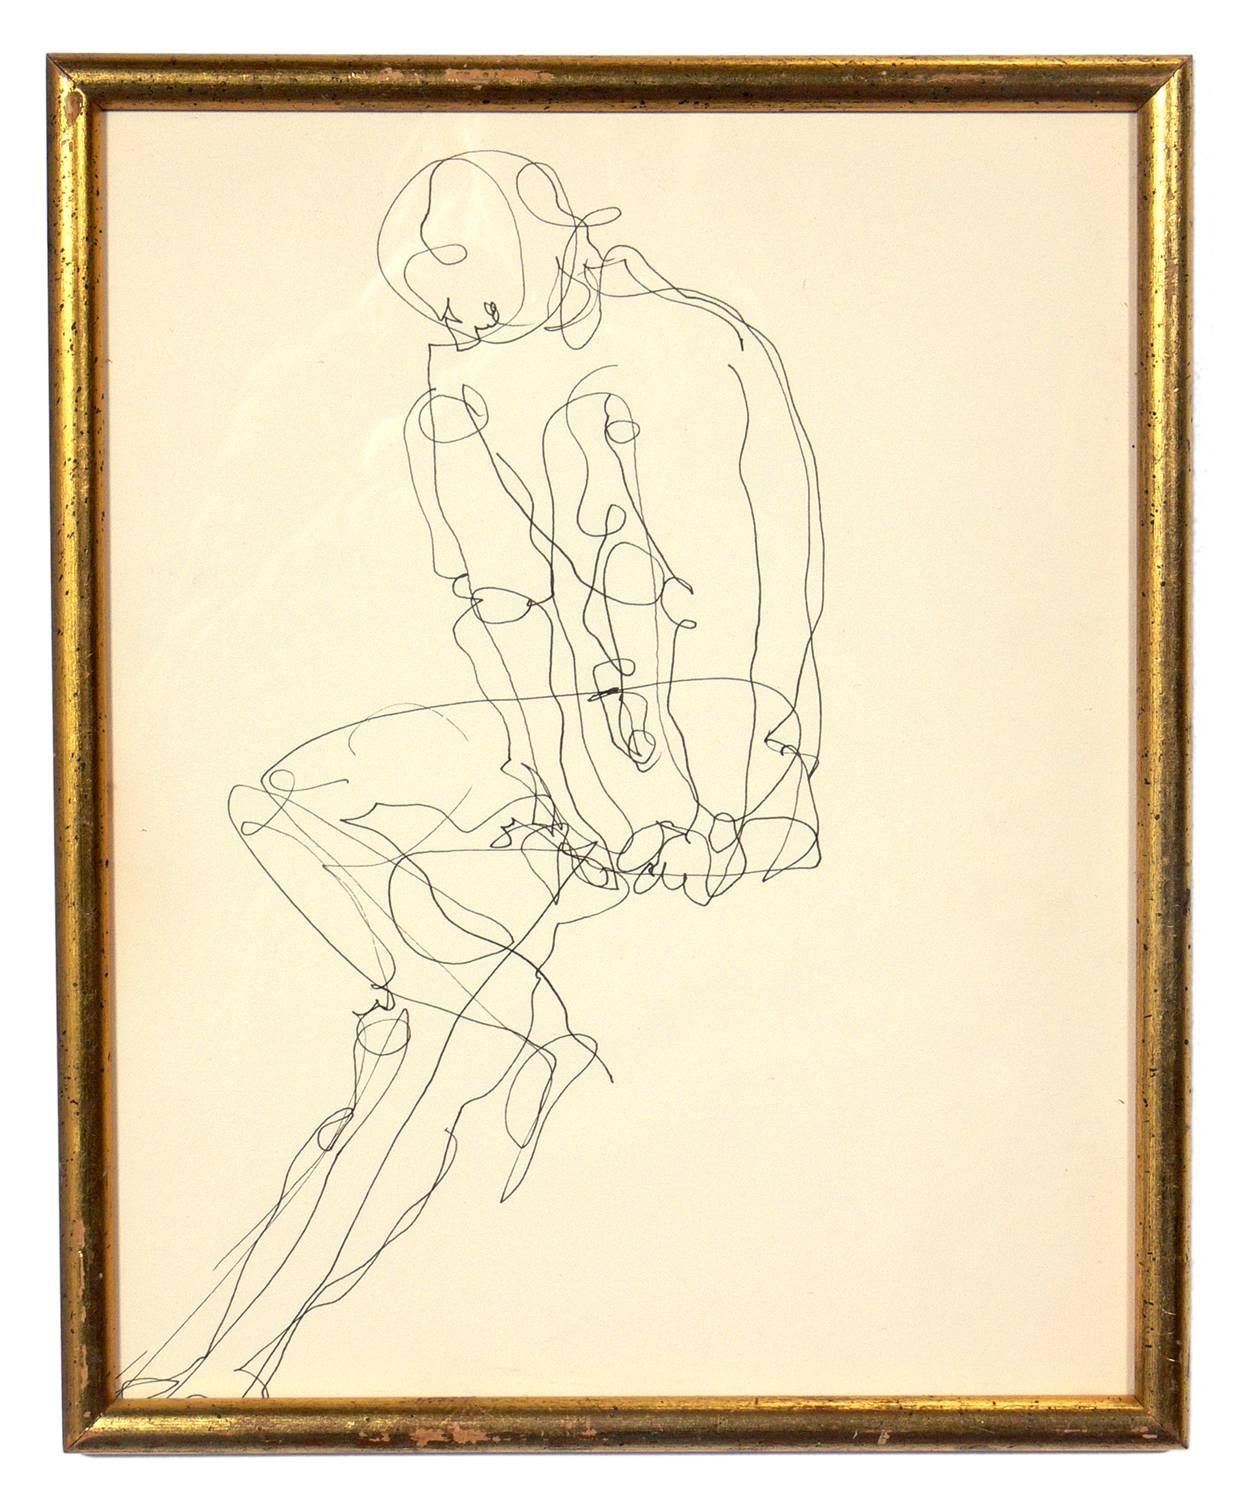 Selection of Figural Line Drawings or Gallery Wall by Miriam Kubach, American, circa 1950s. Please see our other 1stdibs listings for more Miriam Kubach works. 

From left to right, these works measure:
1) 13